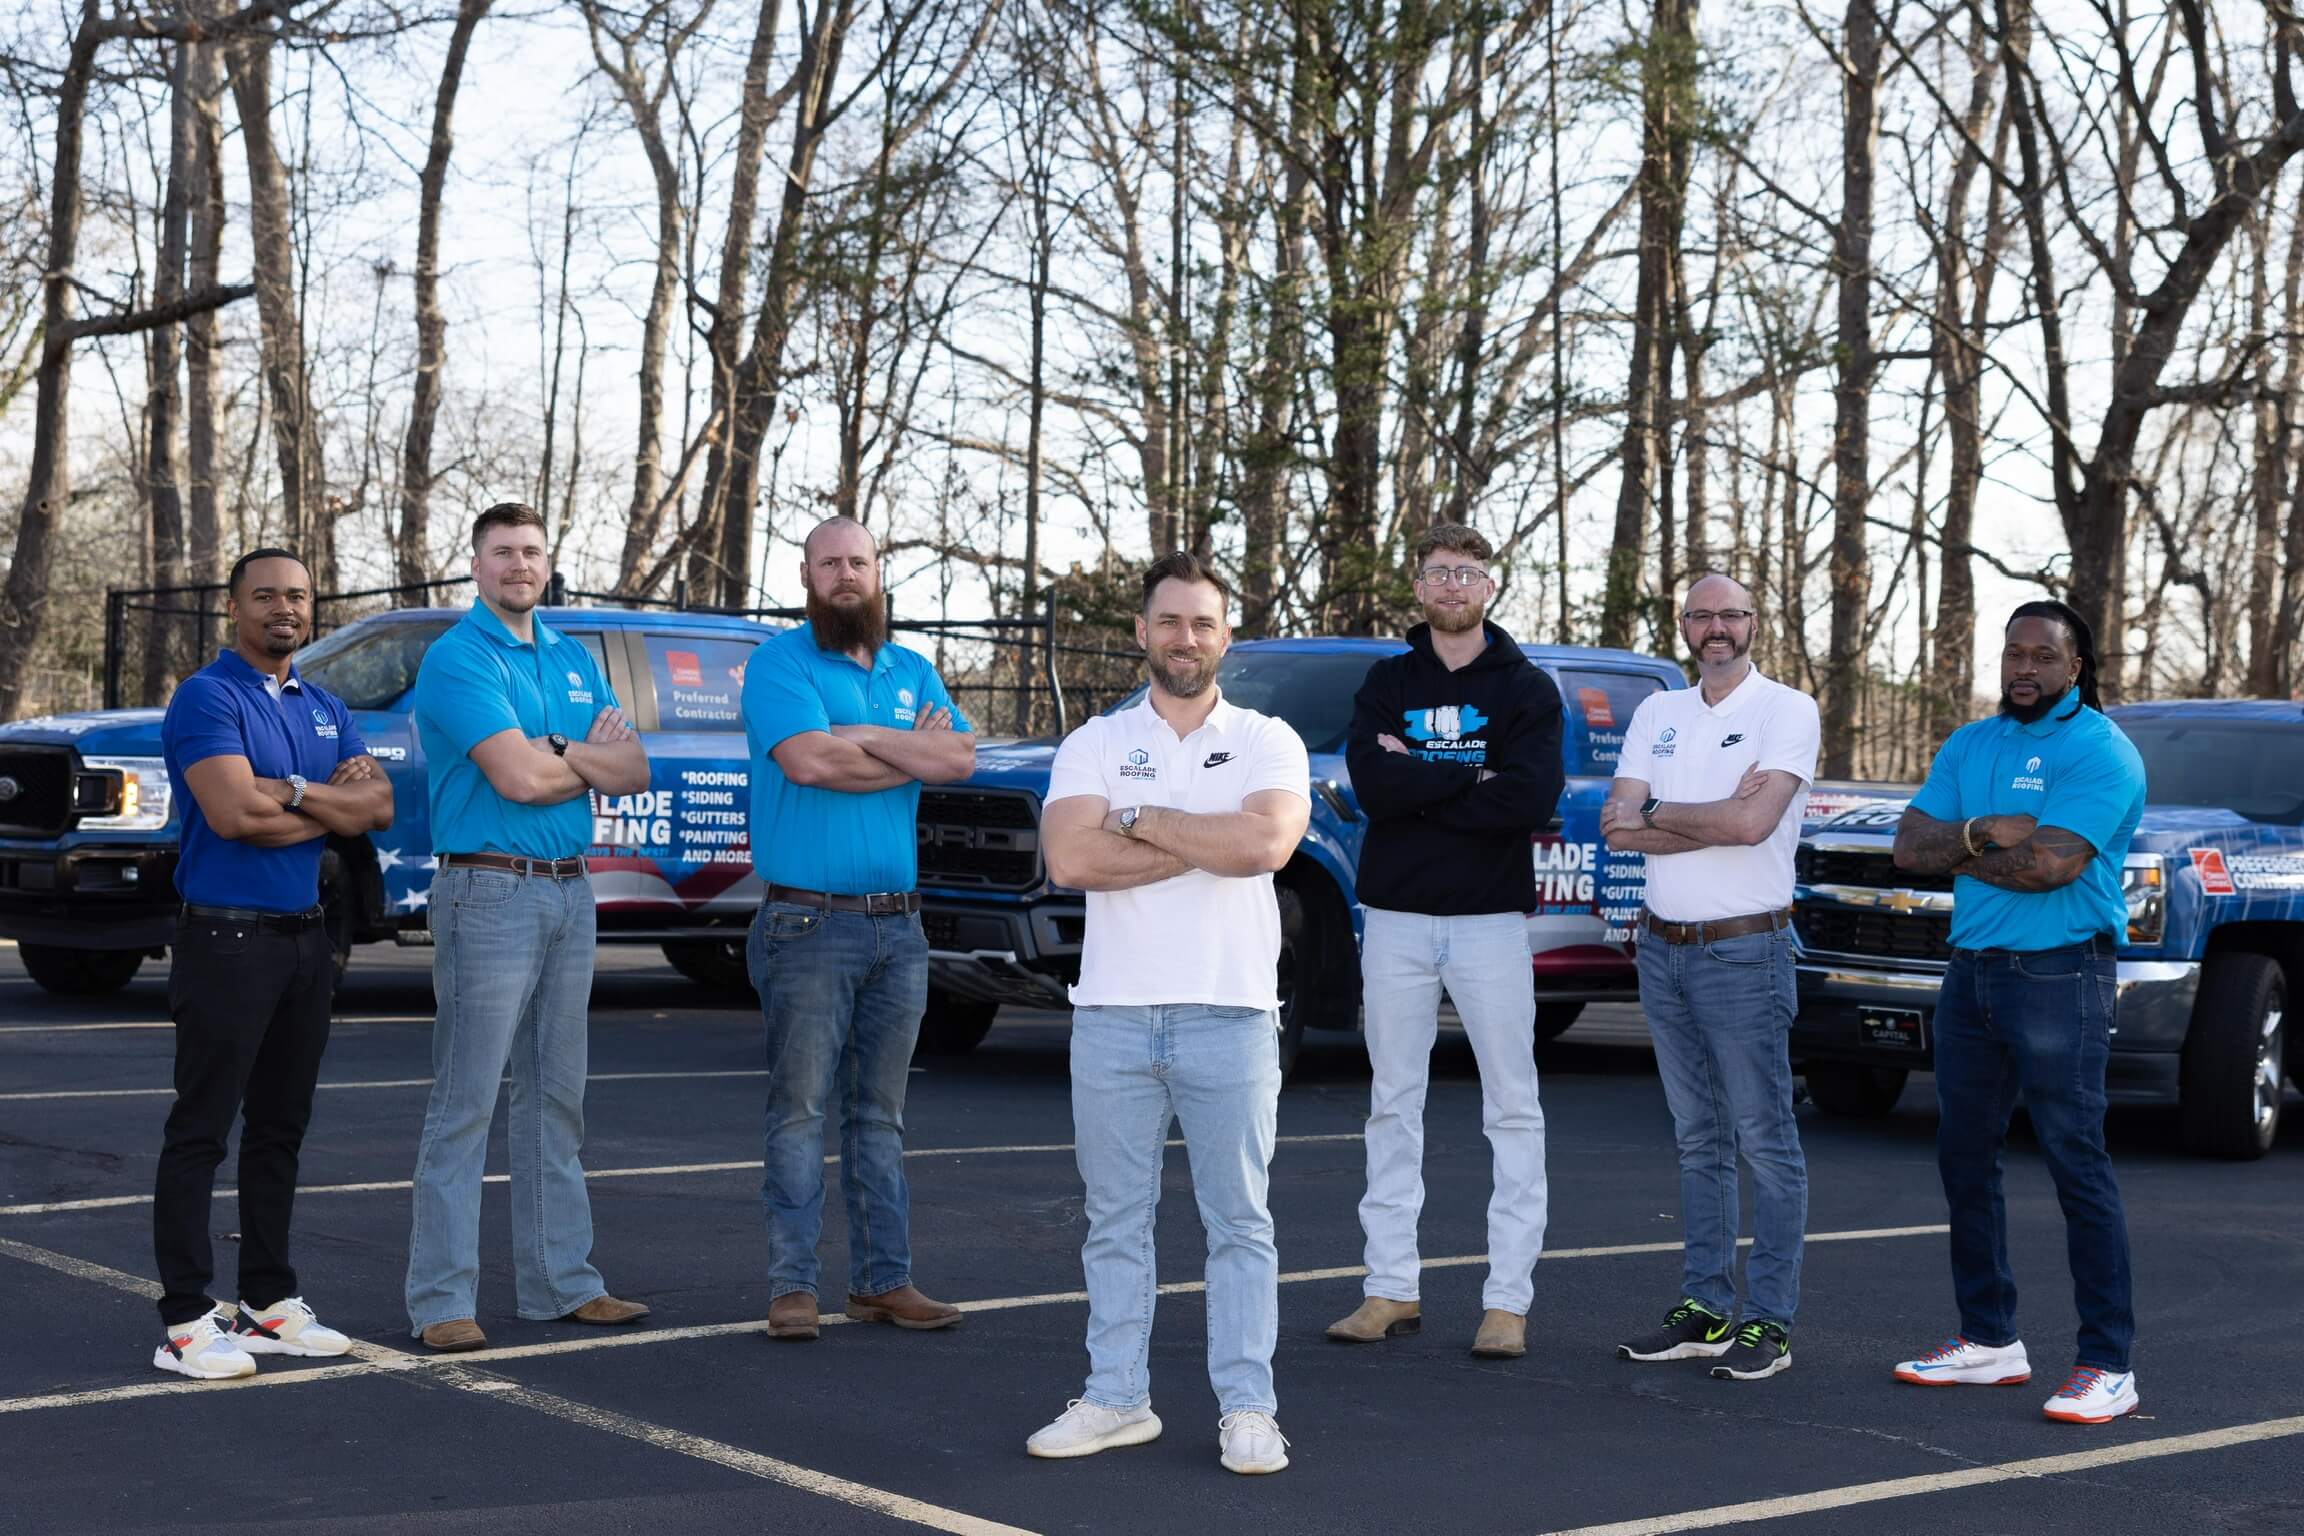 escalade roofing professional roofers team picture greensboro, nc